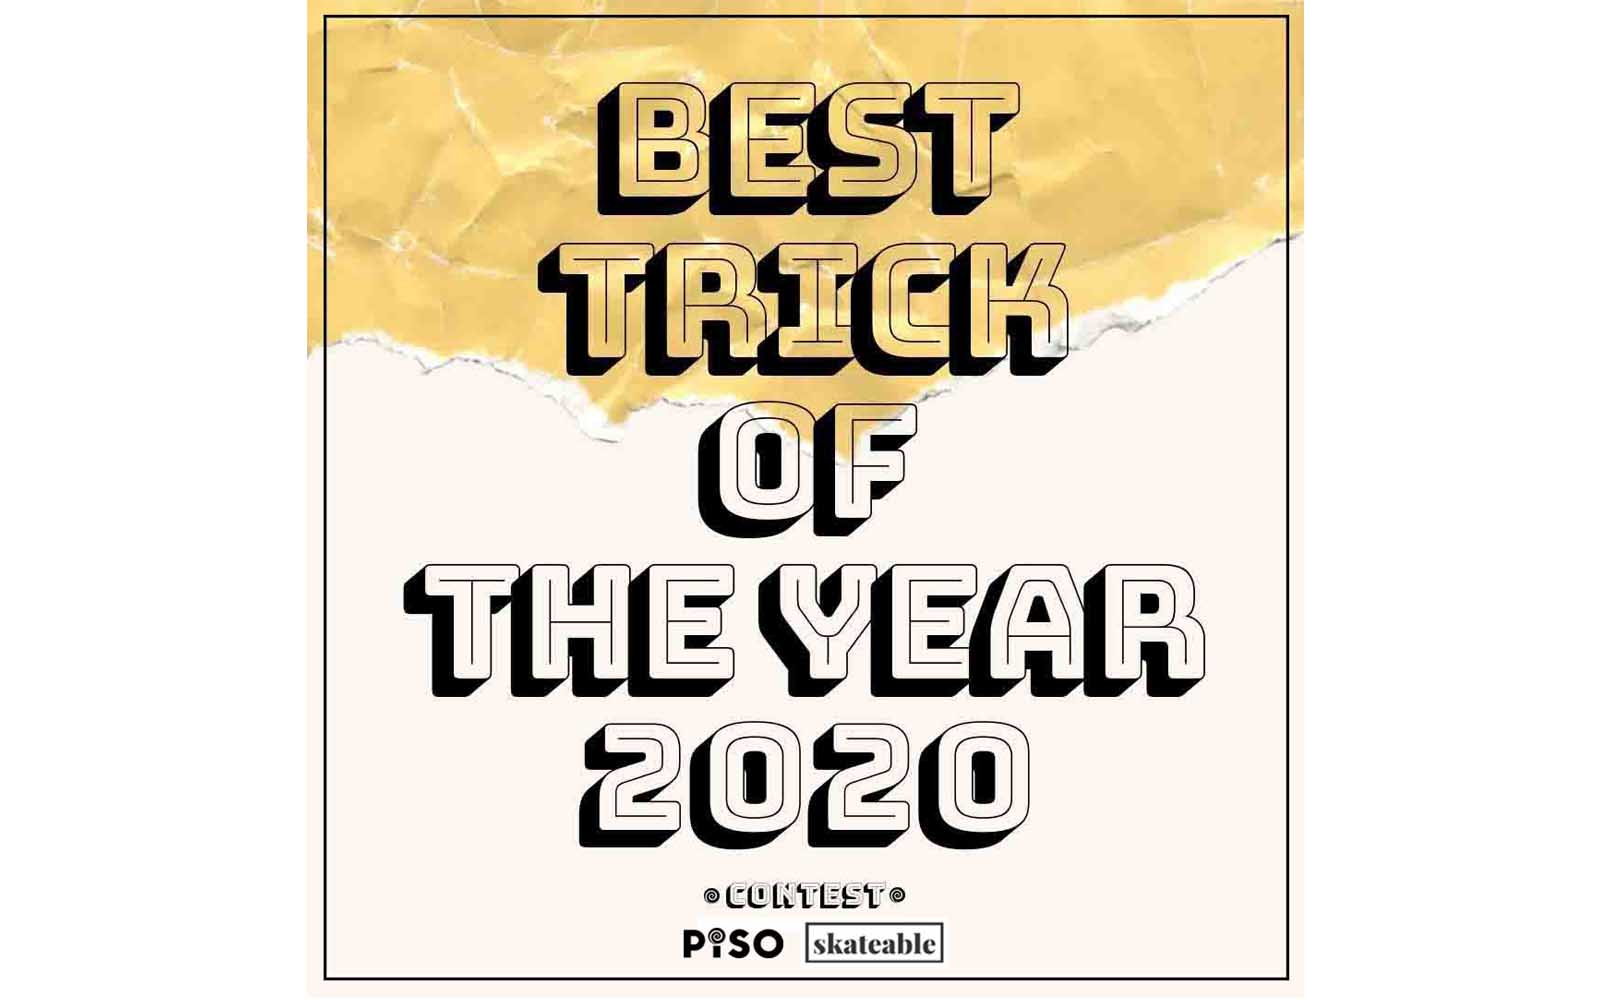 Best trick of the year 2020